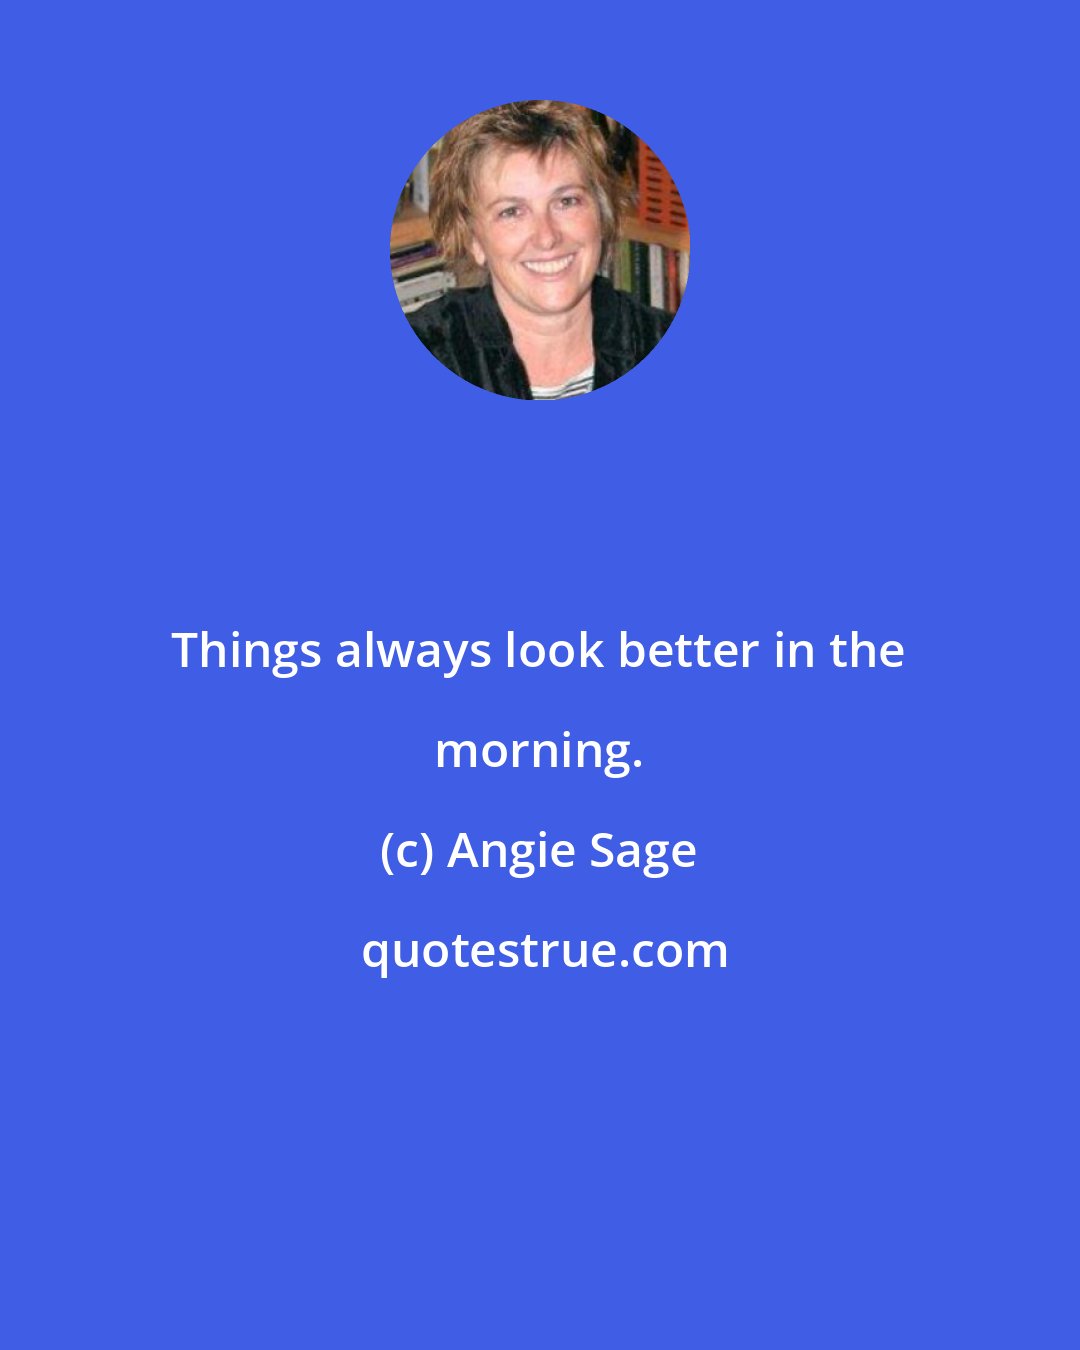 Angie Sage: Things always look better in the morning.